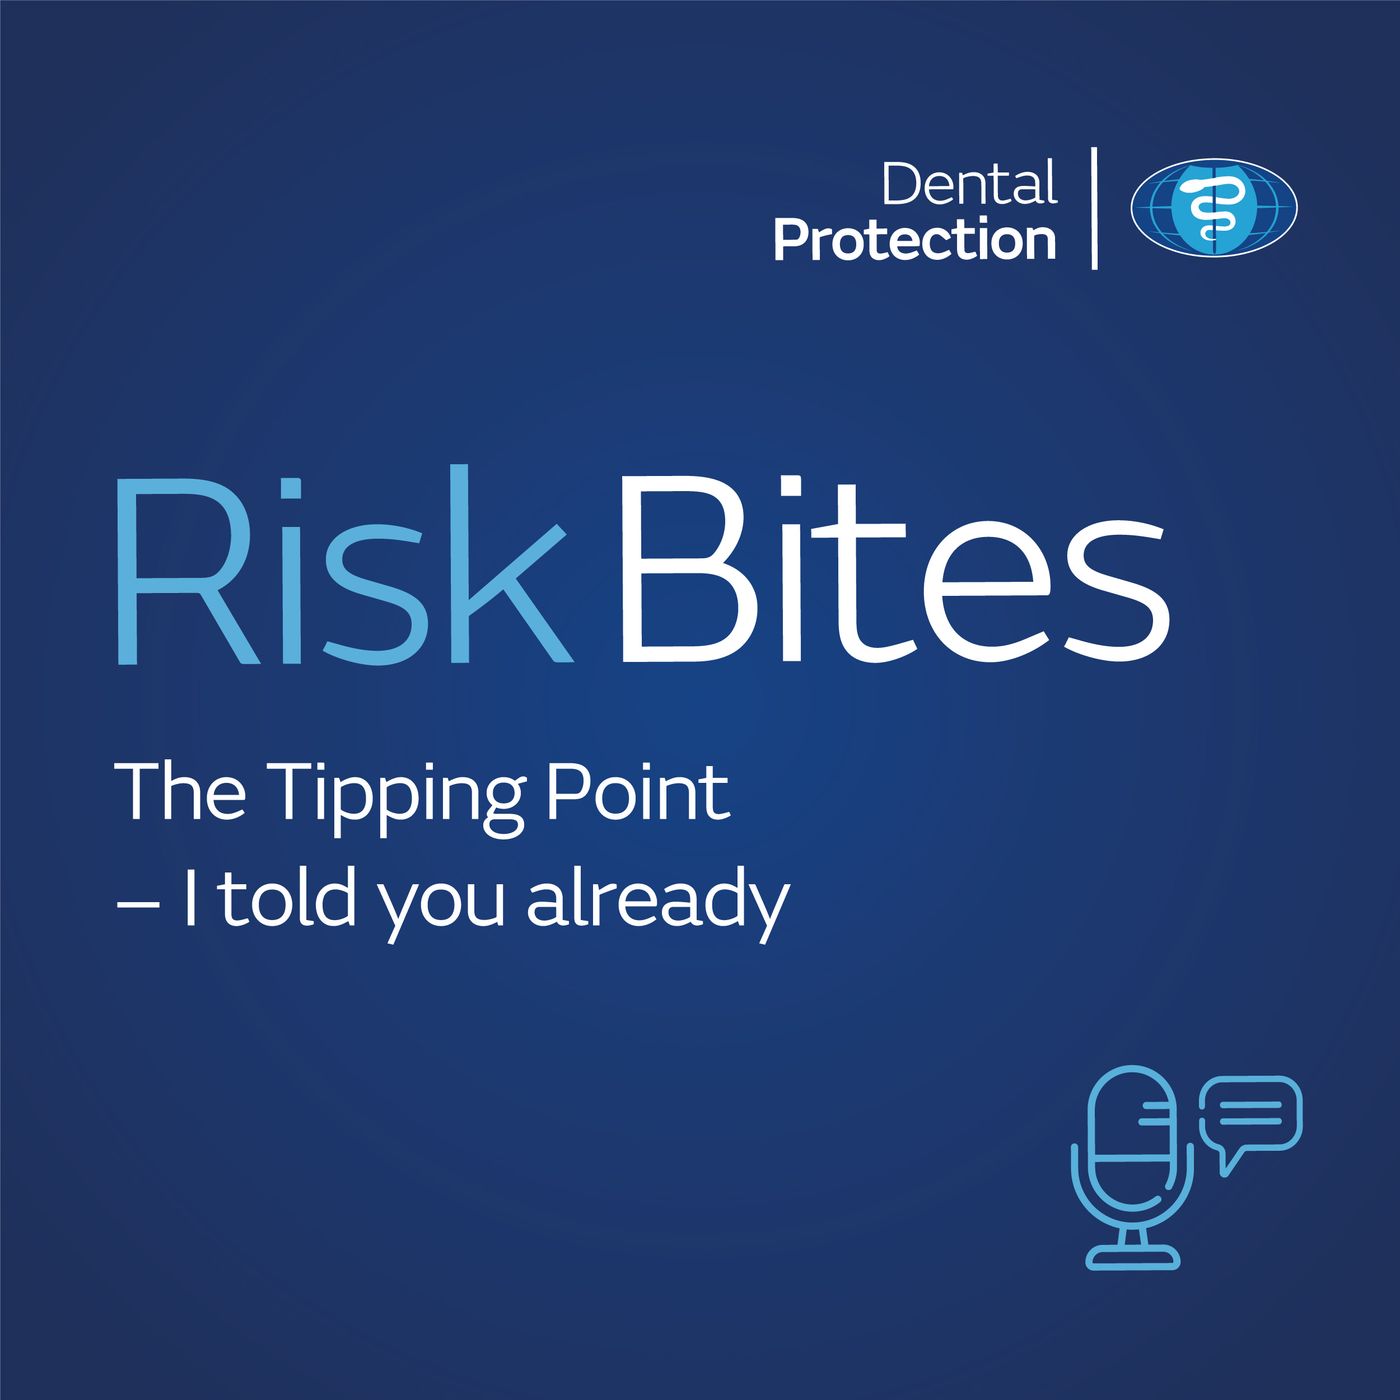 RiskBites - The Tipping Point - I told you already